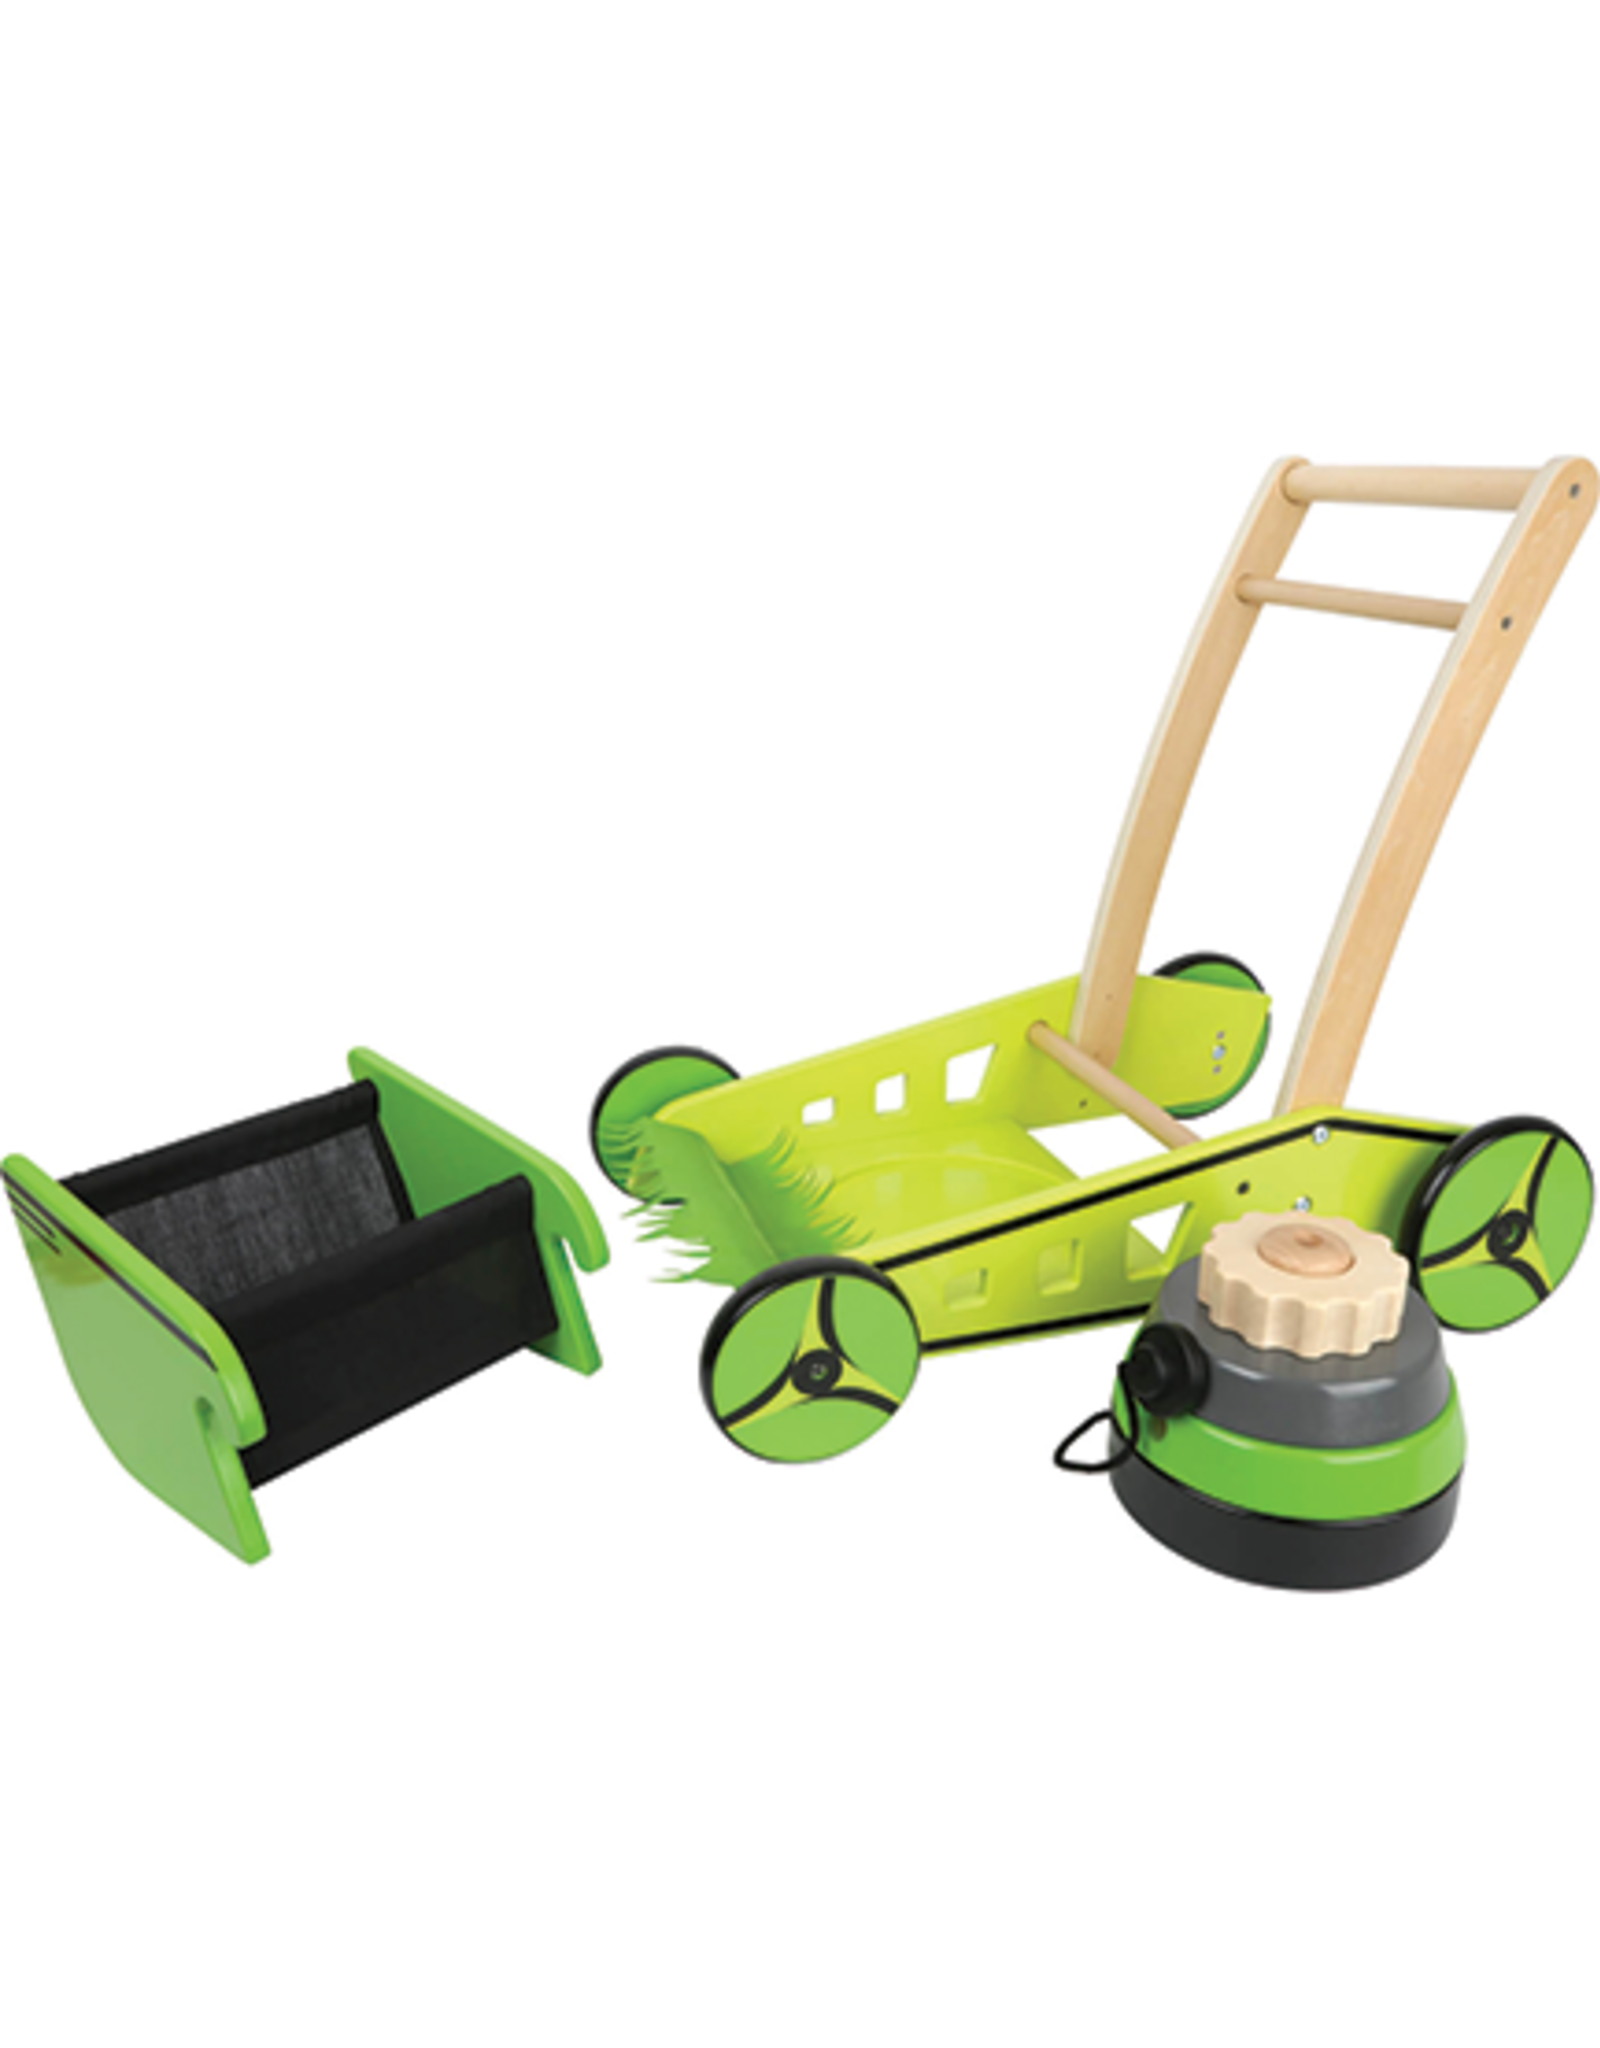 Small Foot Small Foot Lawn Mower Baby Walker